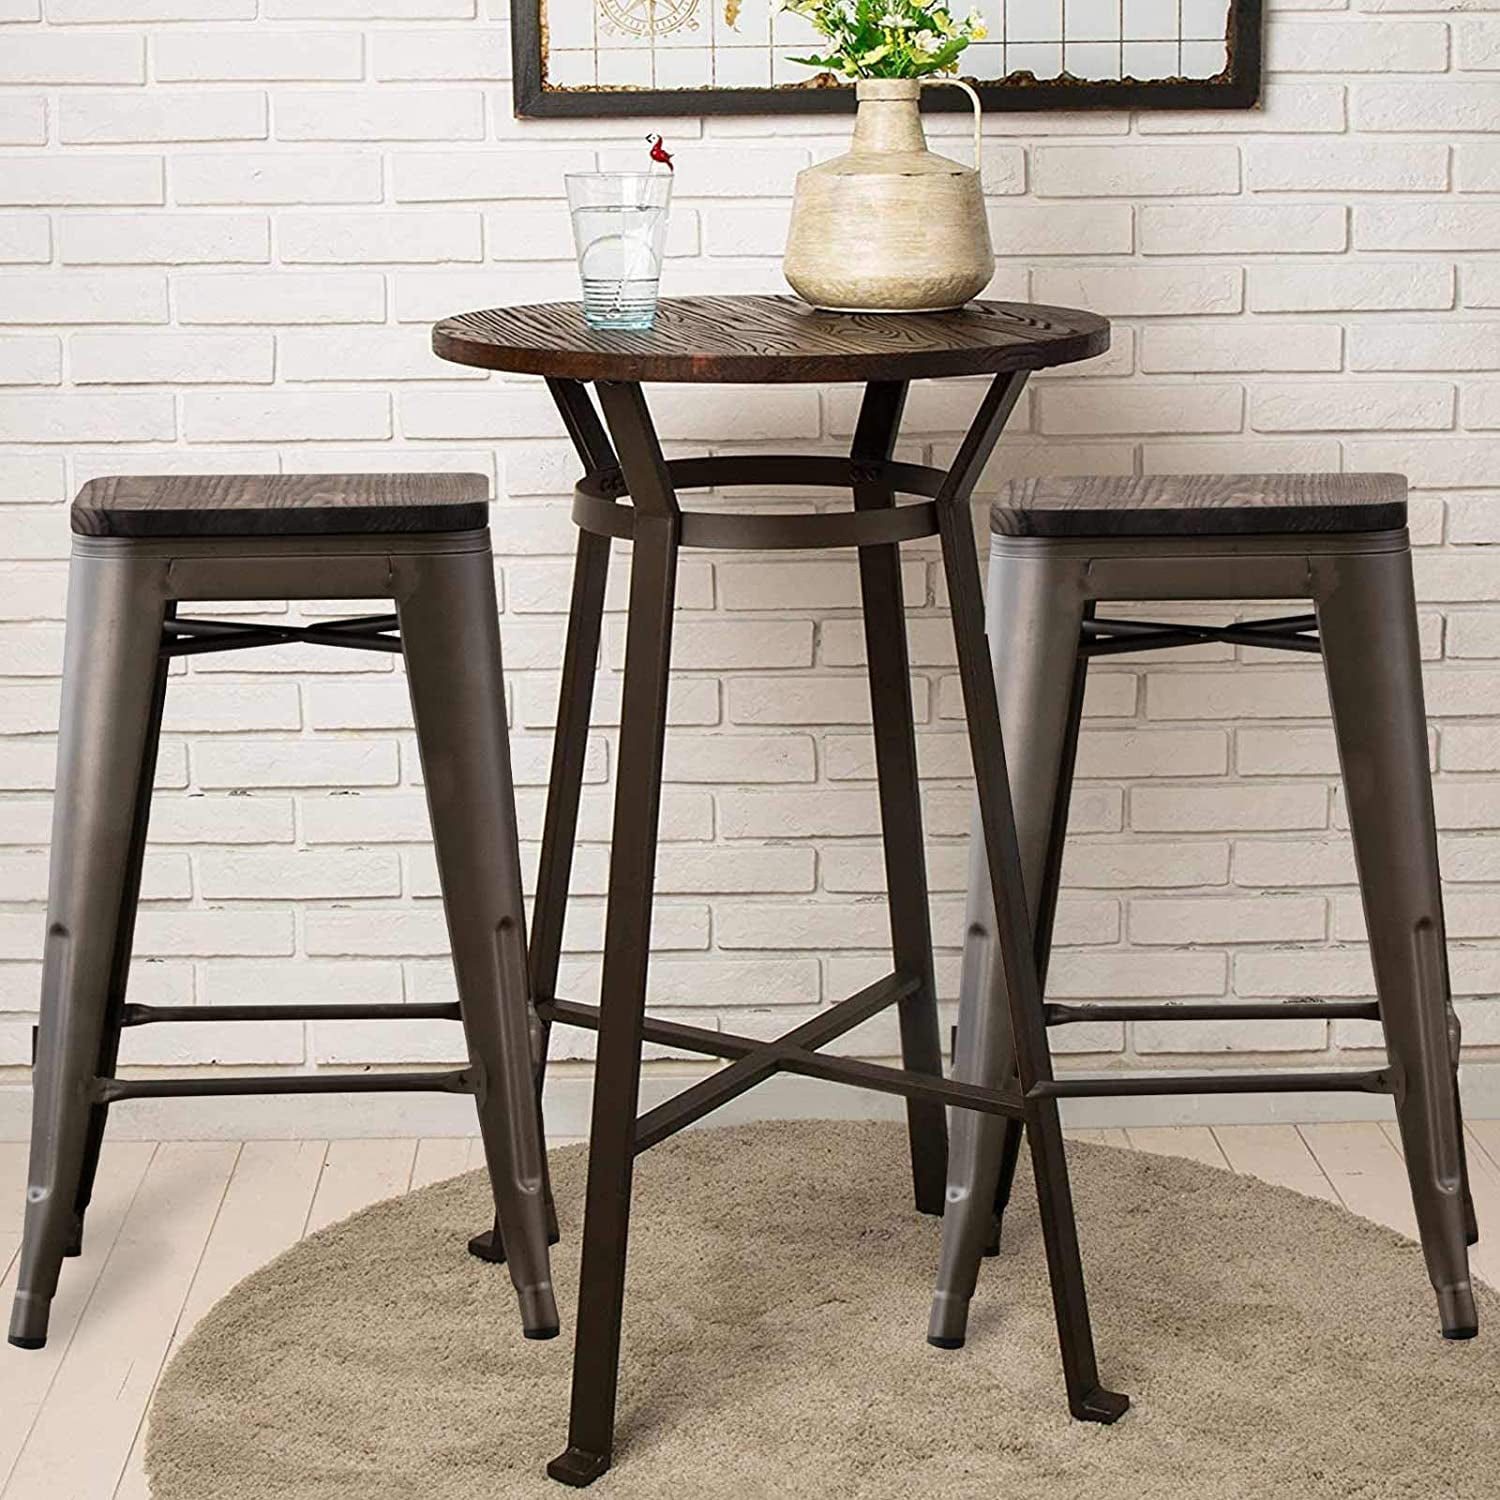 24 Inch Counter Height Stackable Barstools Indoor Outdoor Patio Furniture Dining Backless Kitchen Bar Stools Set of 4 Bonzy Home Metal Bar Stools